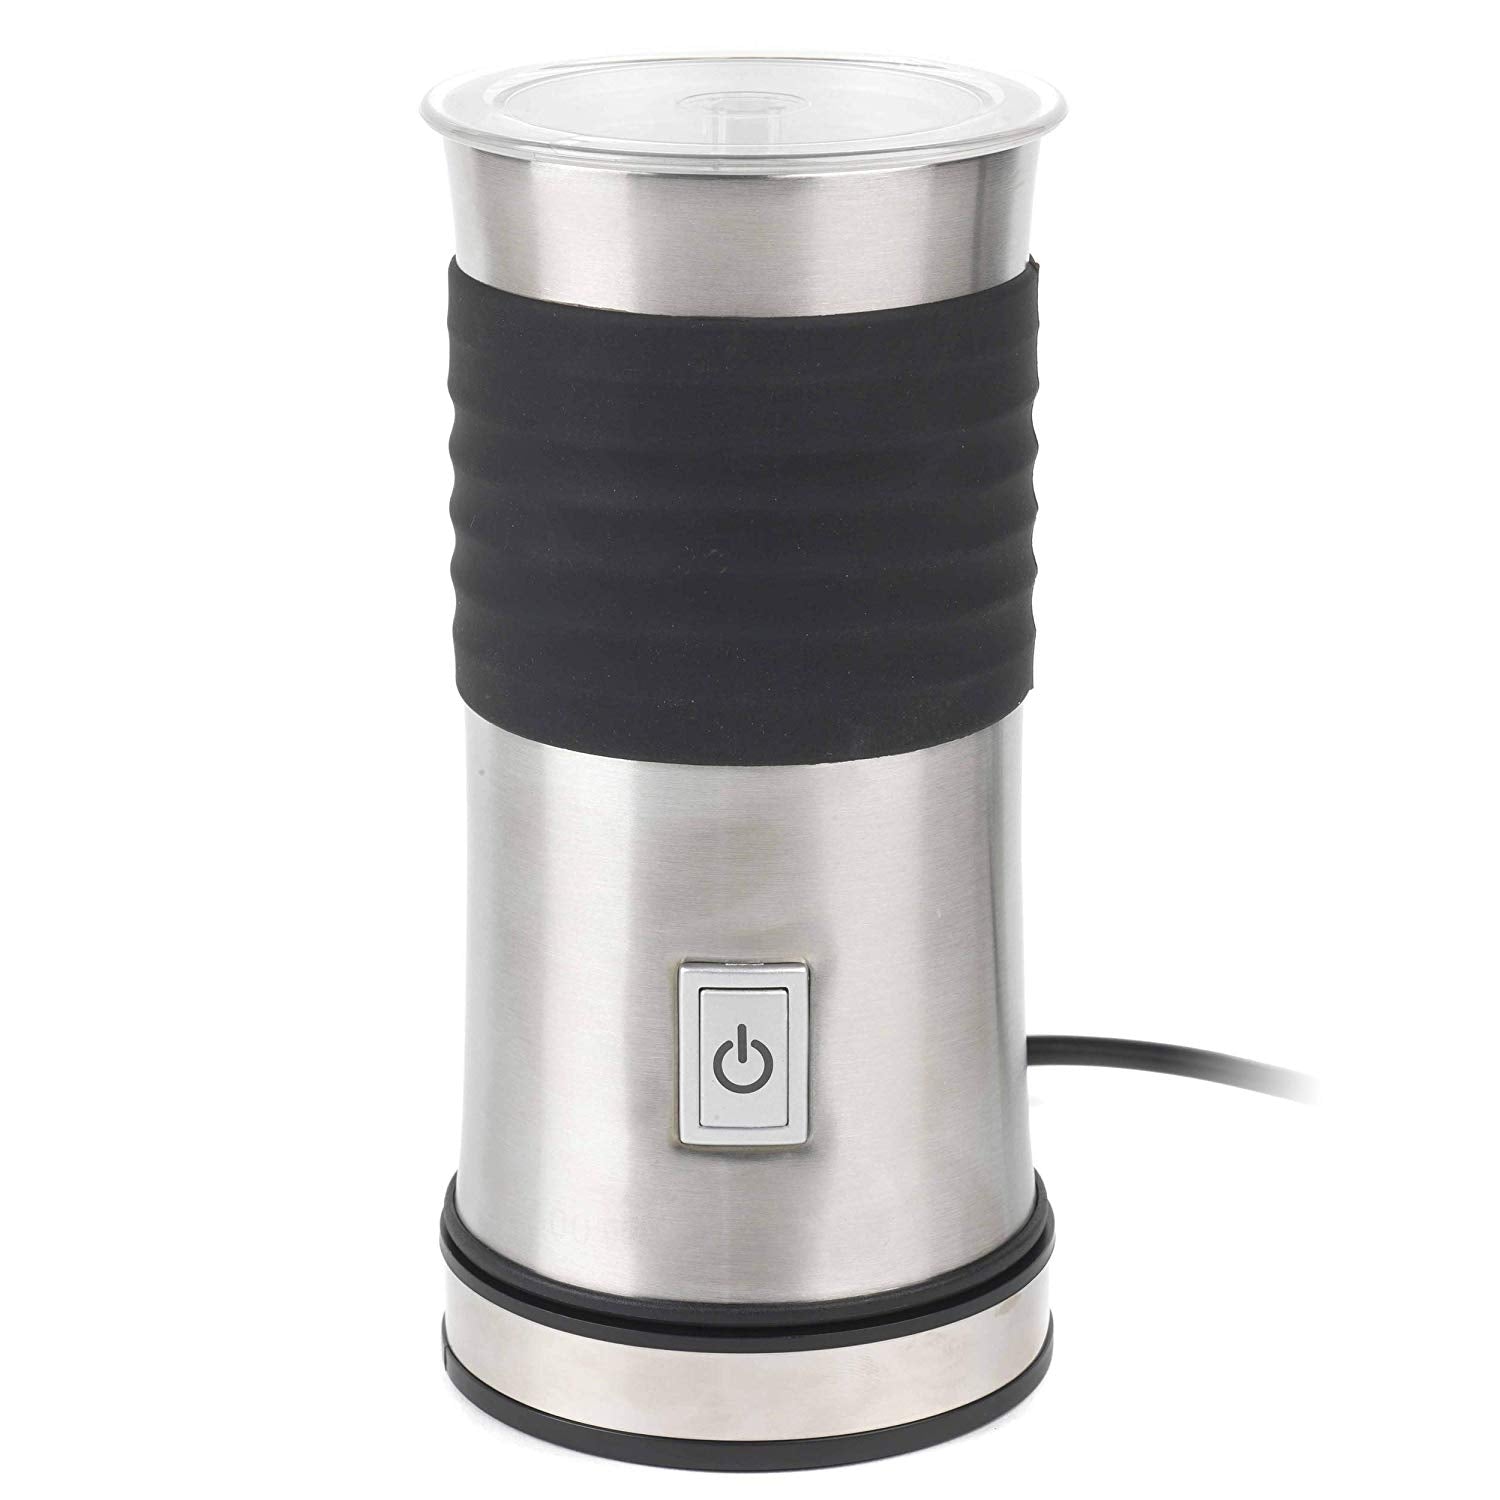 Salter 500w Electric Compact Milk Frother Warmer